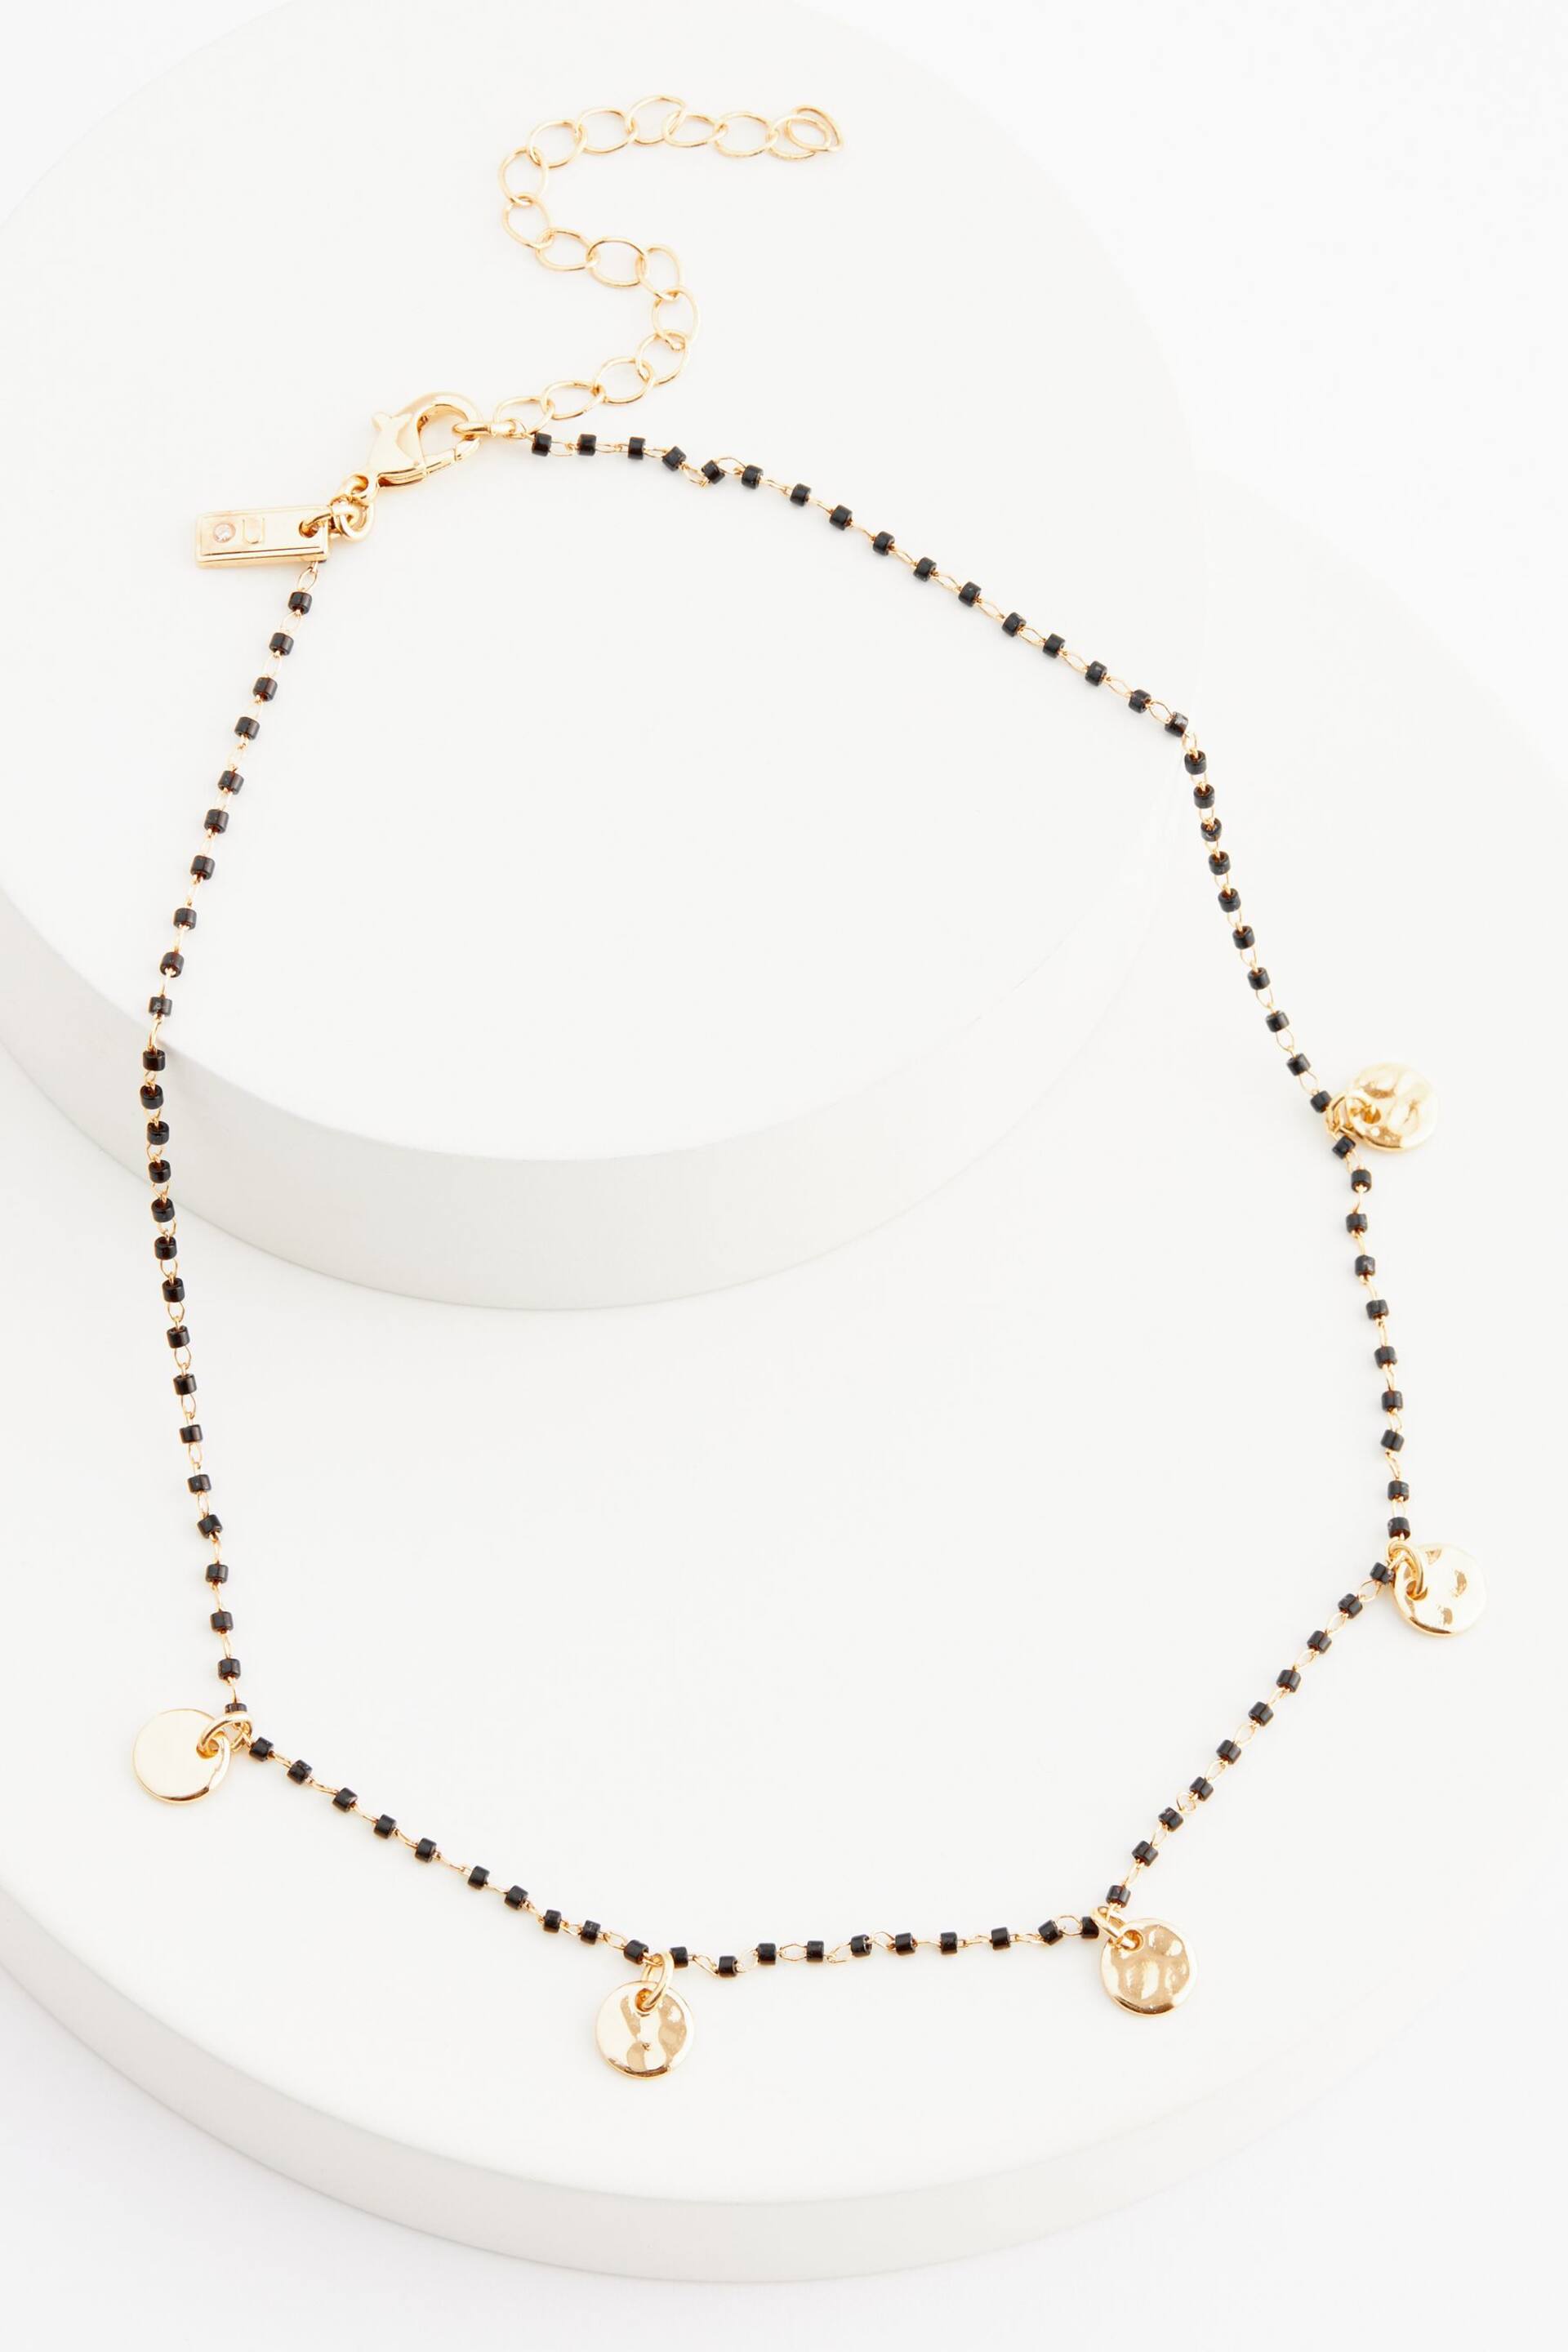 Gold Tone Beaded Disc Choker Necklace - Image 3 of 3